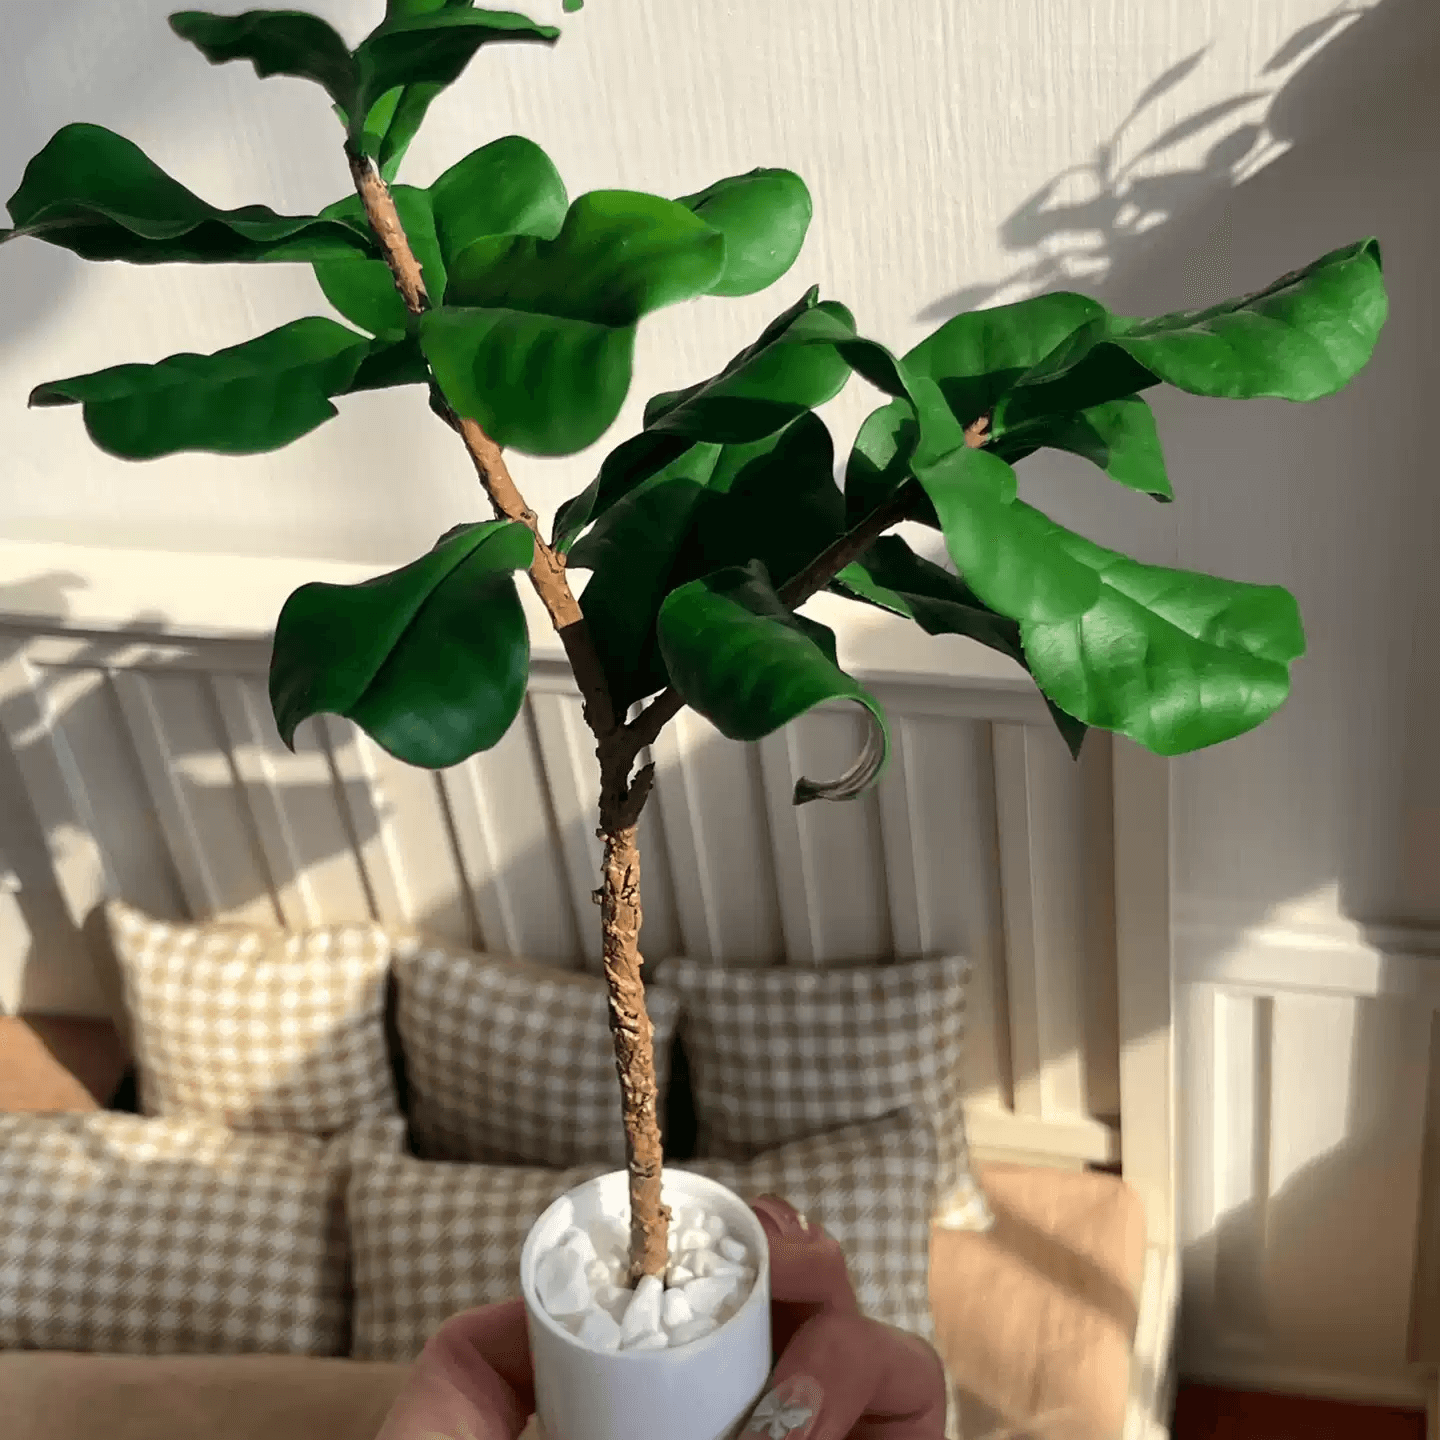 Also known as the Fiddle-Leaf Fig, the Ficus Lyrata/Pandurata is a tall growing fig tree with very large, broad, green leaves. Miniature for dolls, dollhouses, roomboxes. Suitable for Blythe, Barbie, Paola,and other dolls with a height of 25-40cm (10-15.8 inches). Scale: 1:6; 1:12 Material: Handmade from Clay